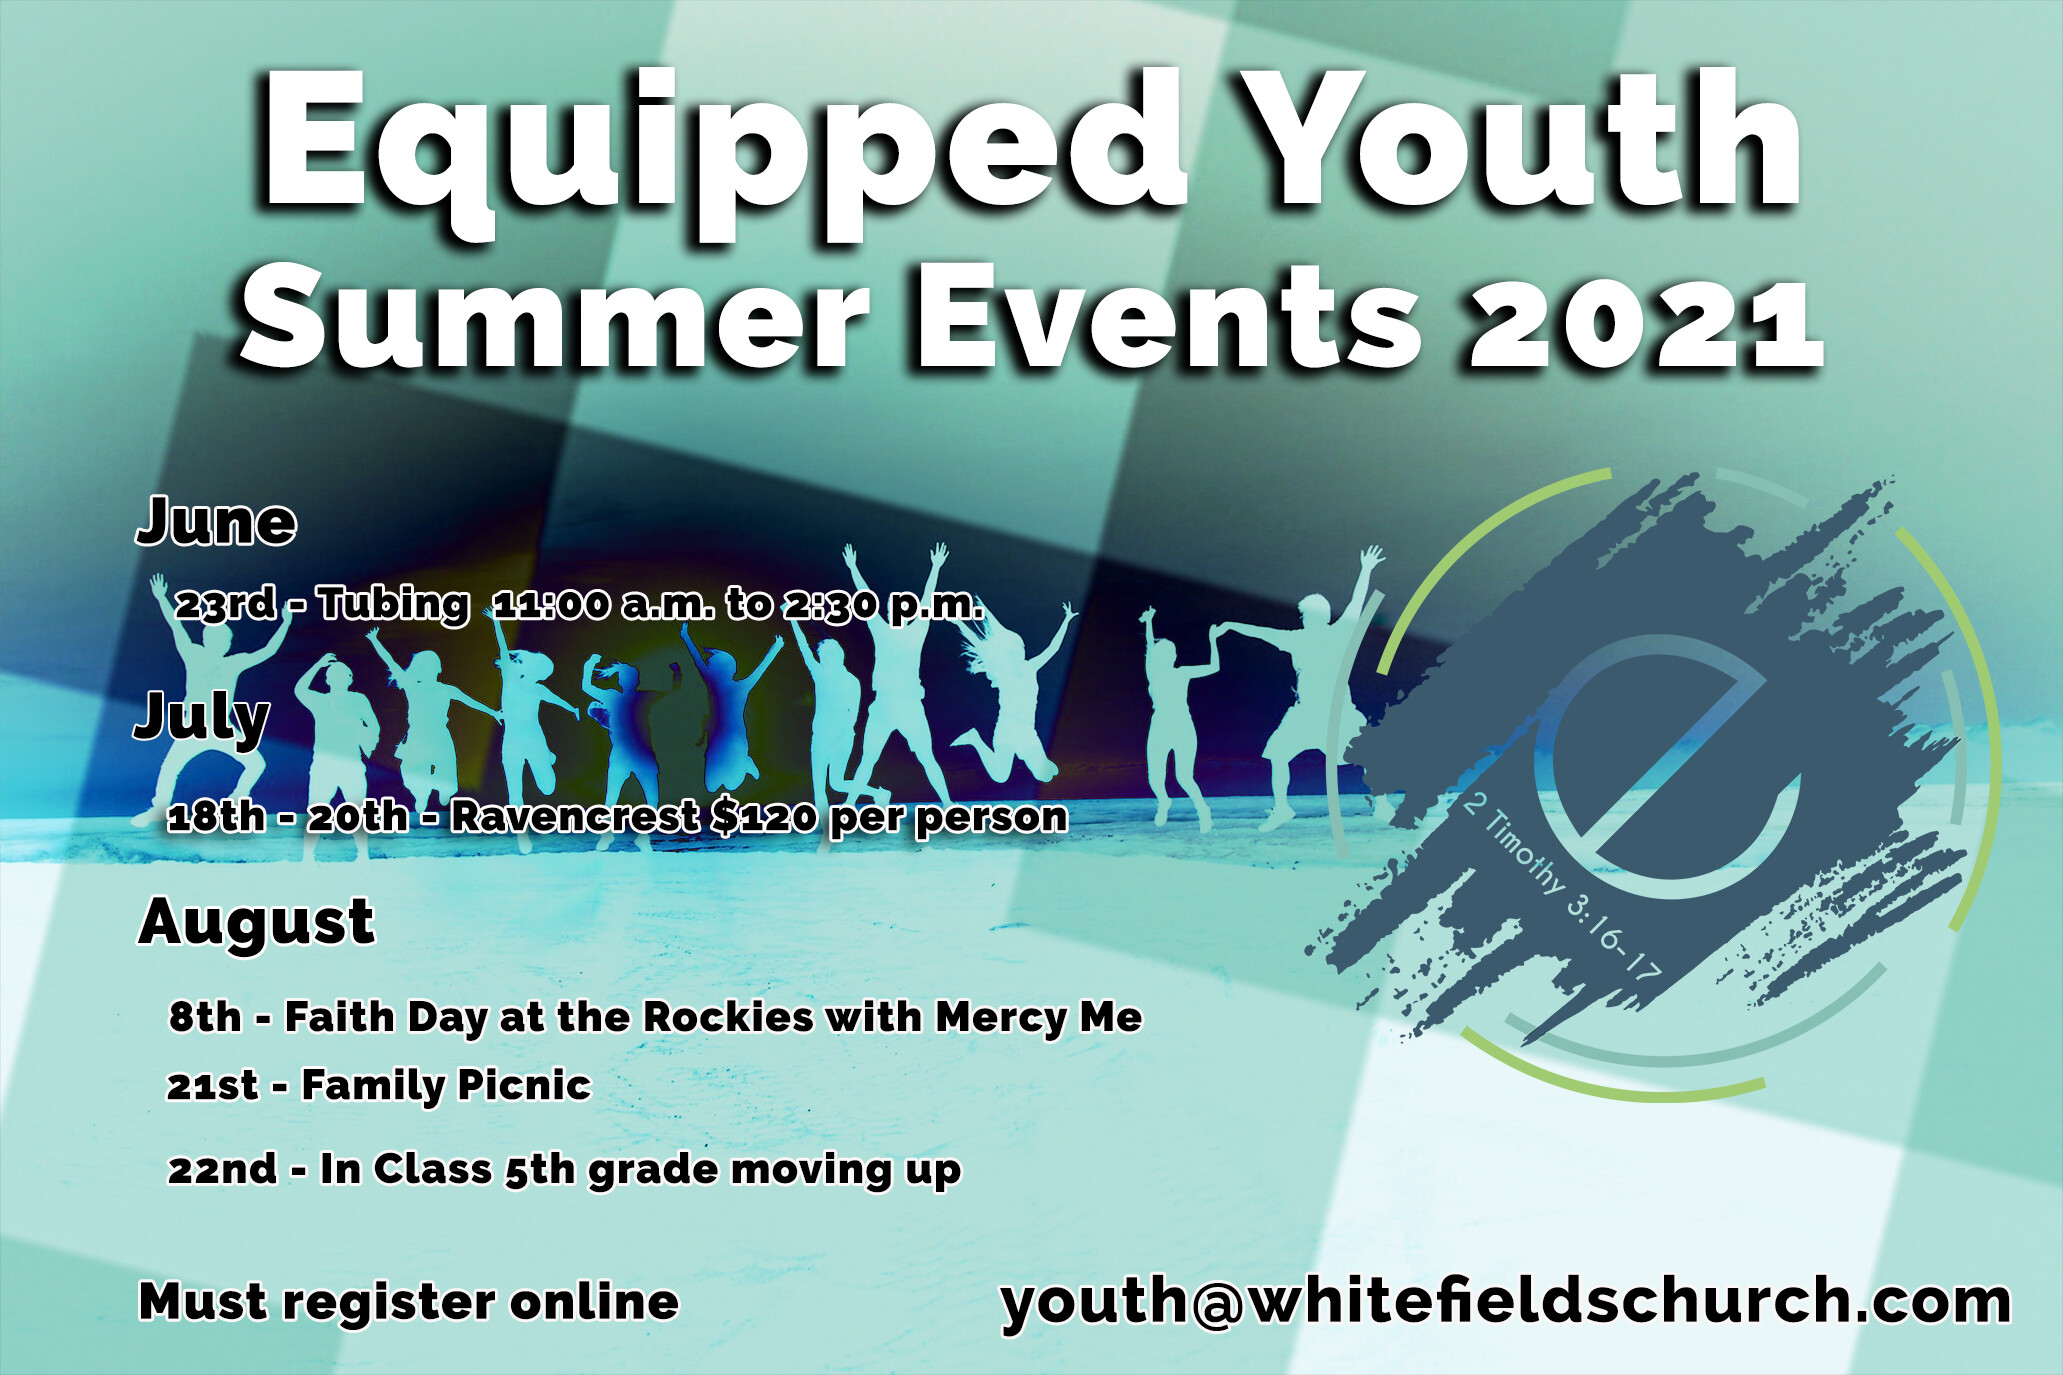 Equipped Youth Summer Events 2021